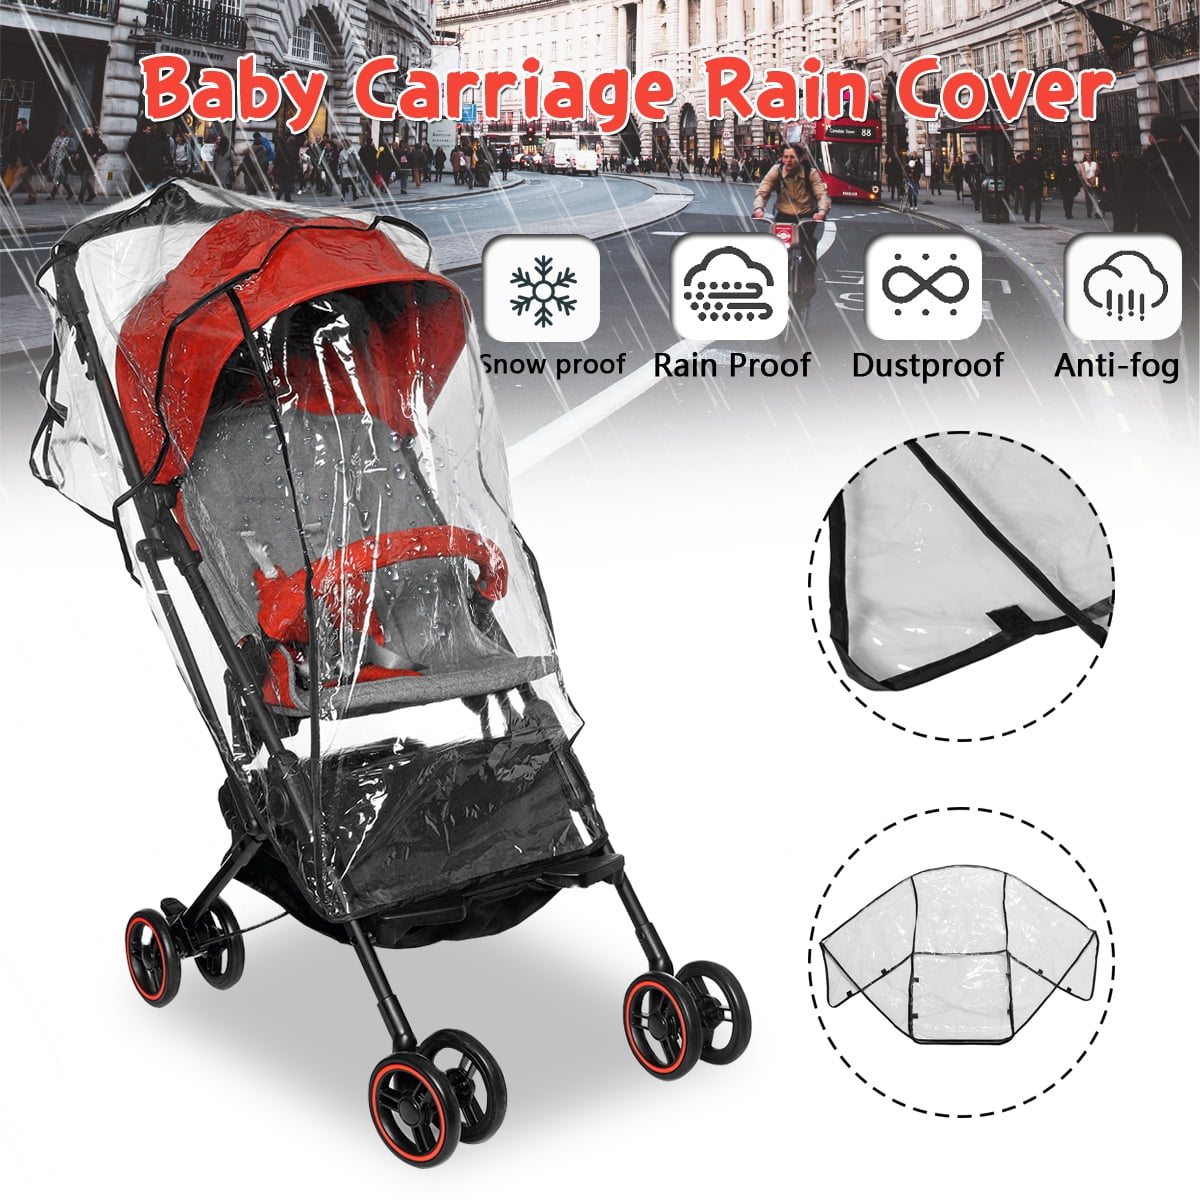 Rain Wind Cover Shield Protector for CHICCO Infant Baby Child Stroller Boy Girl 